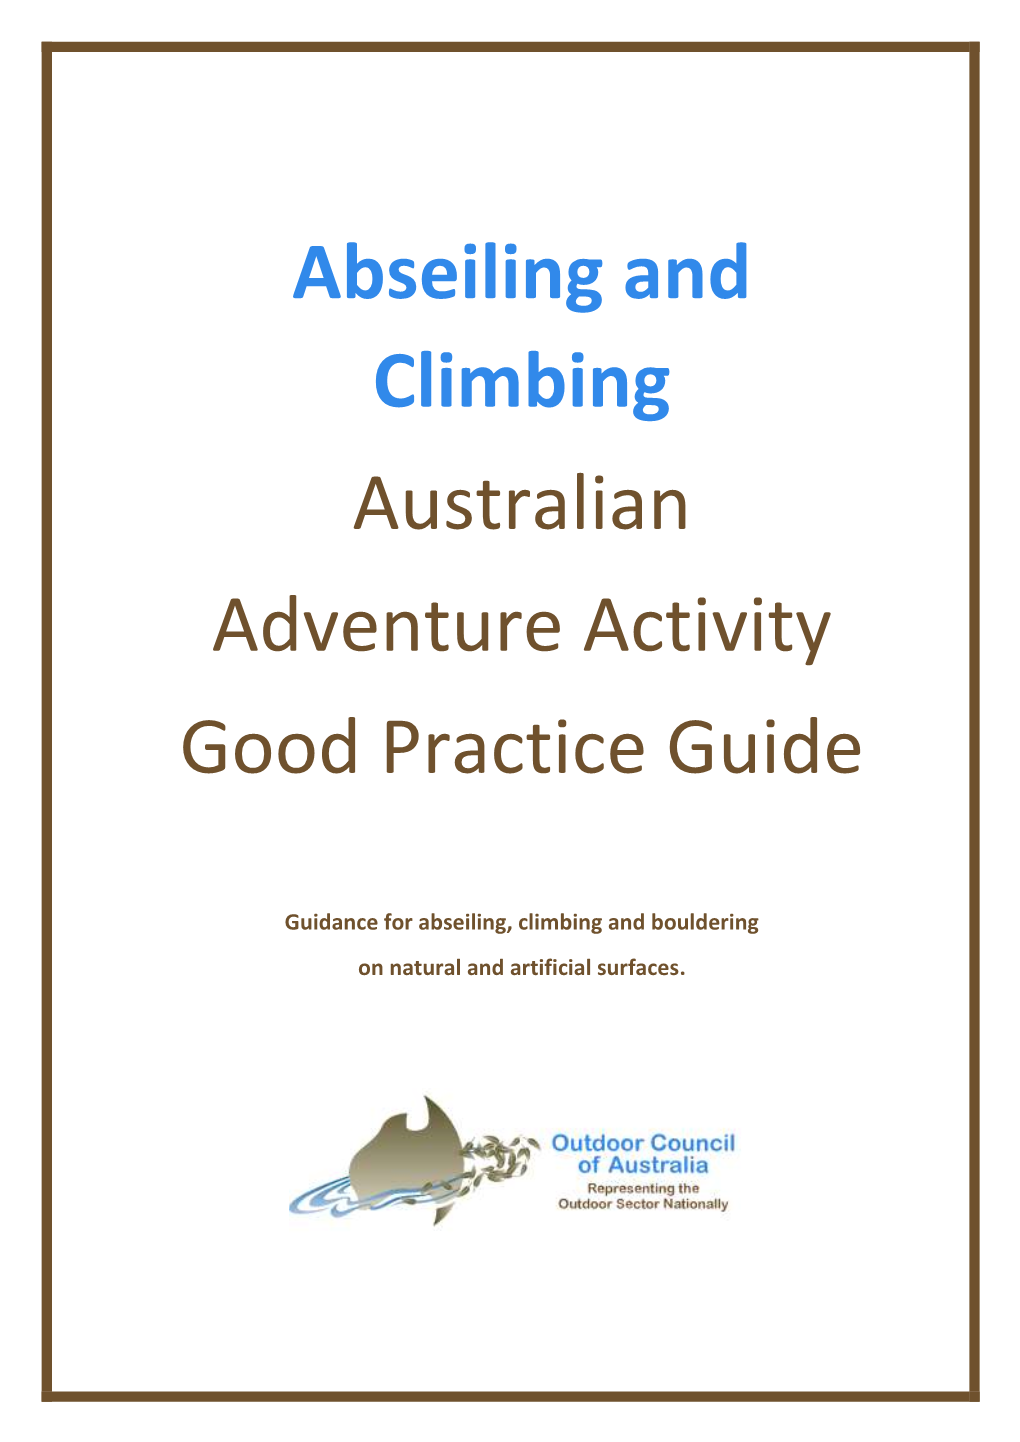 Abseiling and Climbing Australian Adventure Activity Good Practice Guide